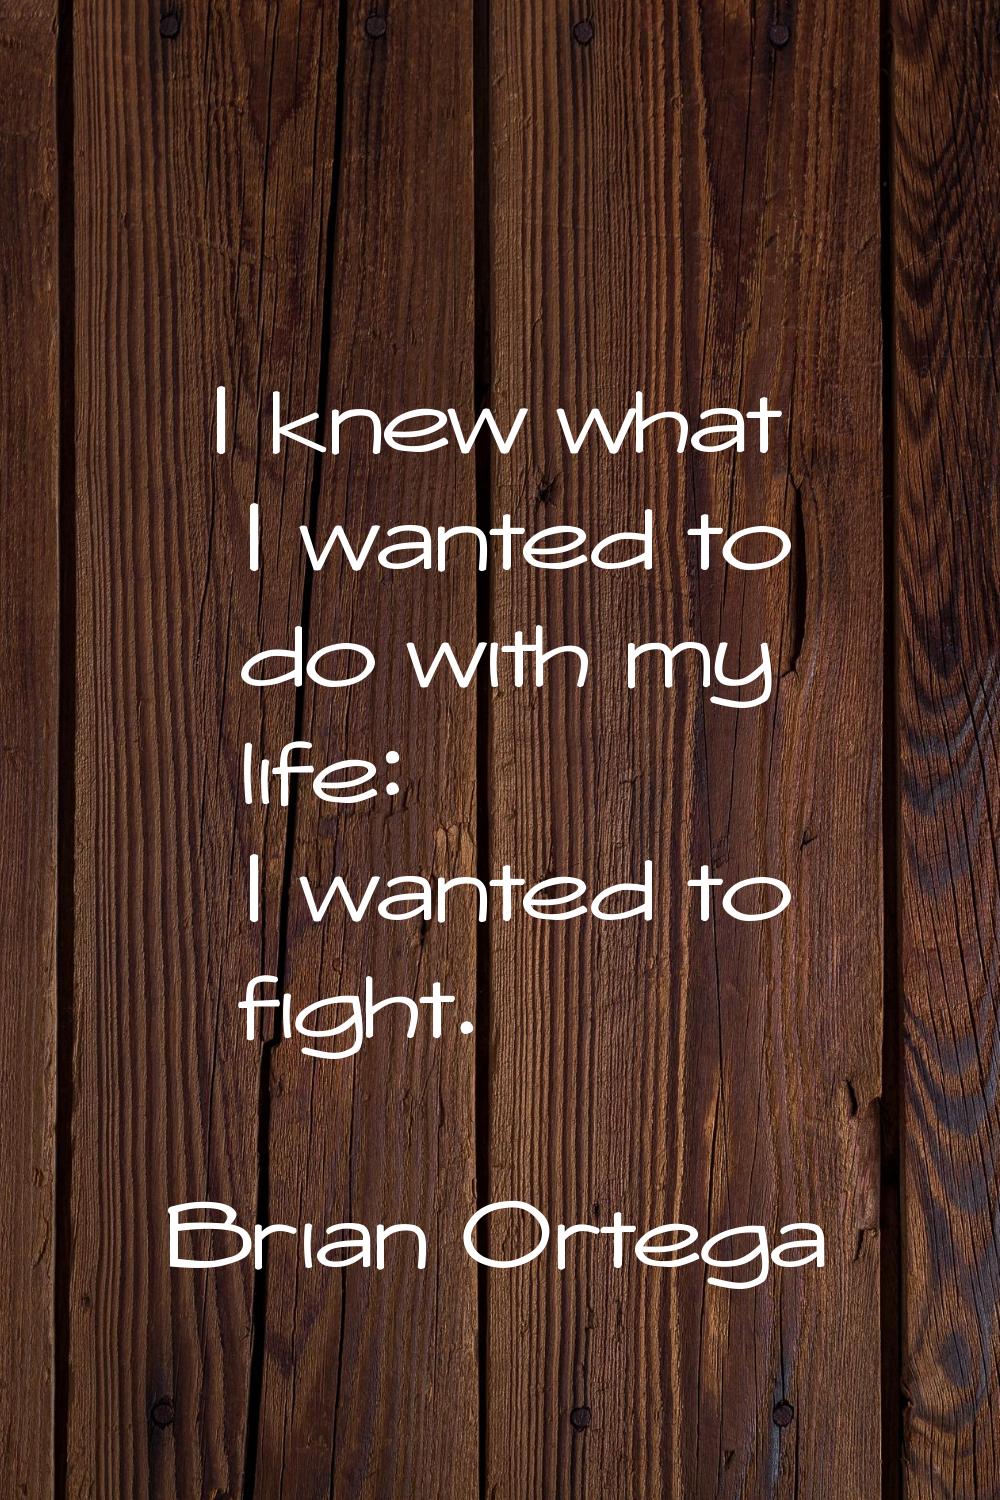 I knew what I wanted to do with my life: I wanted to fight.